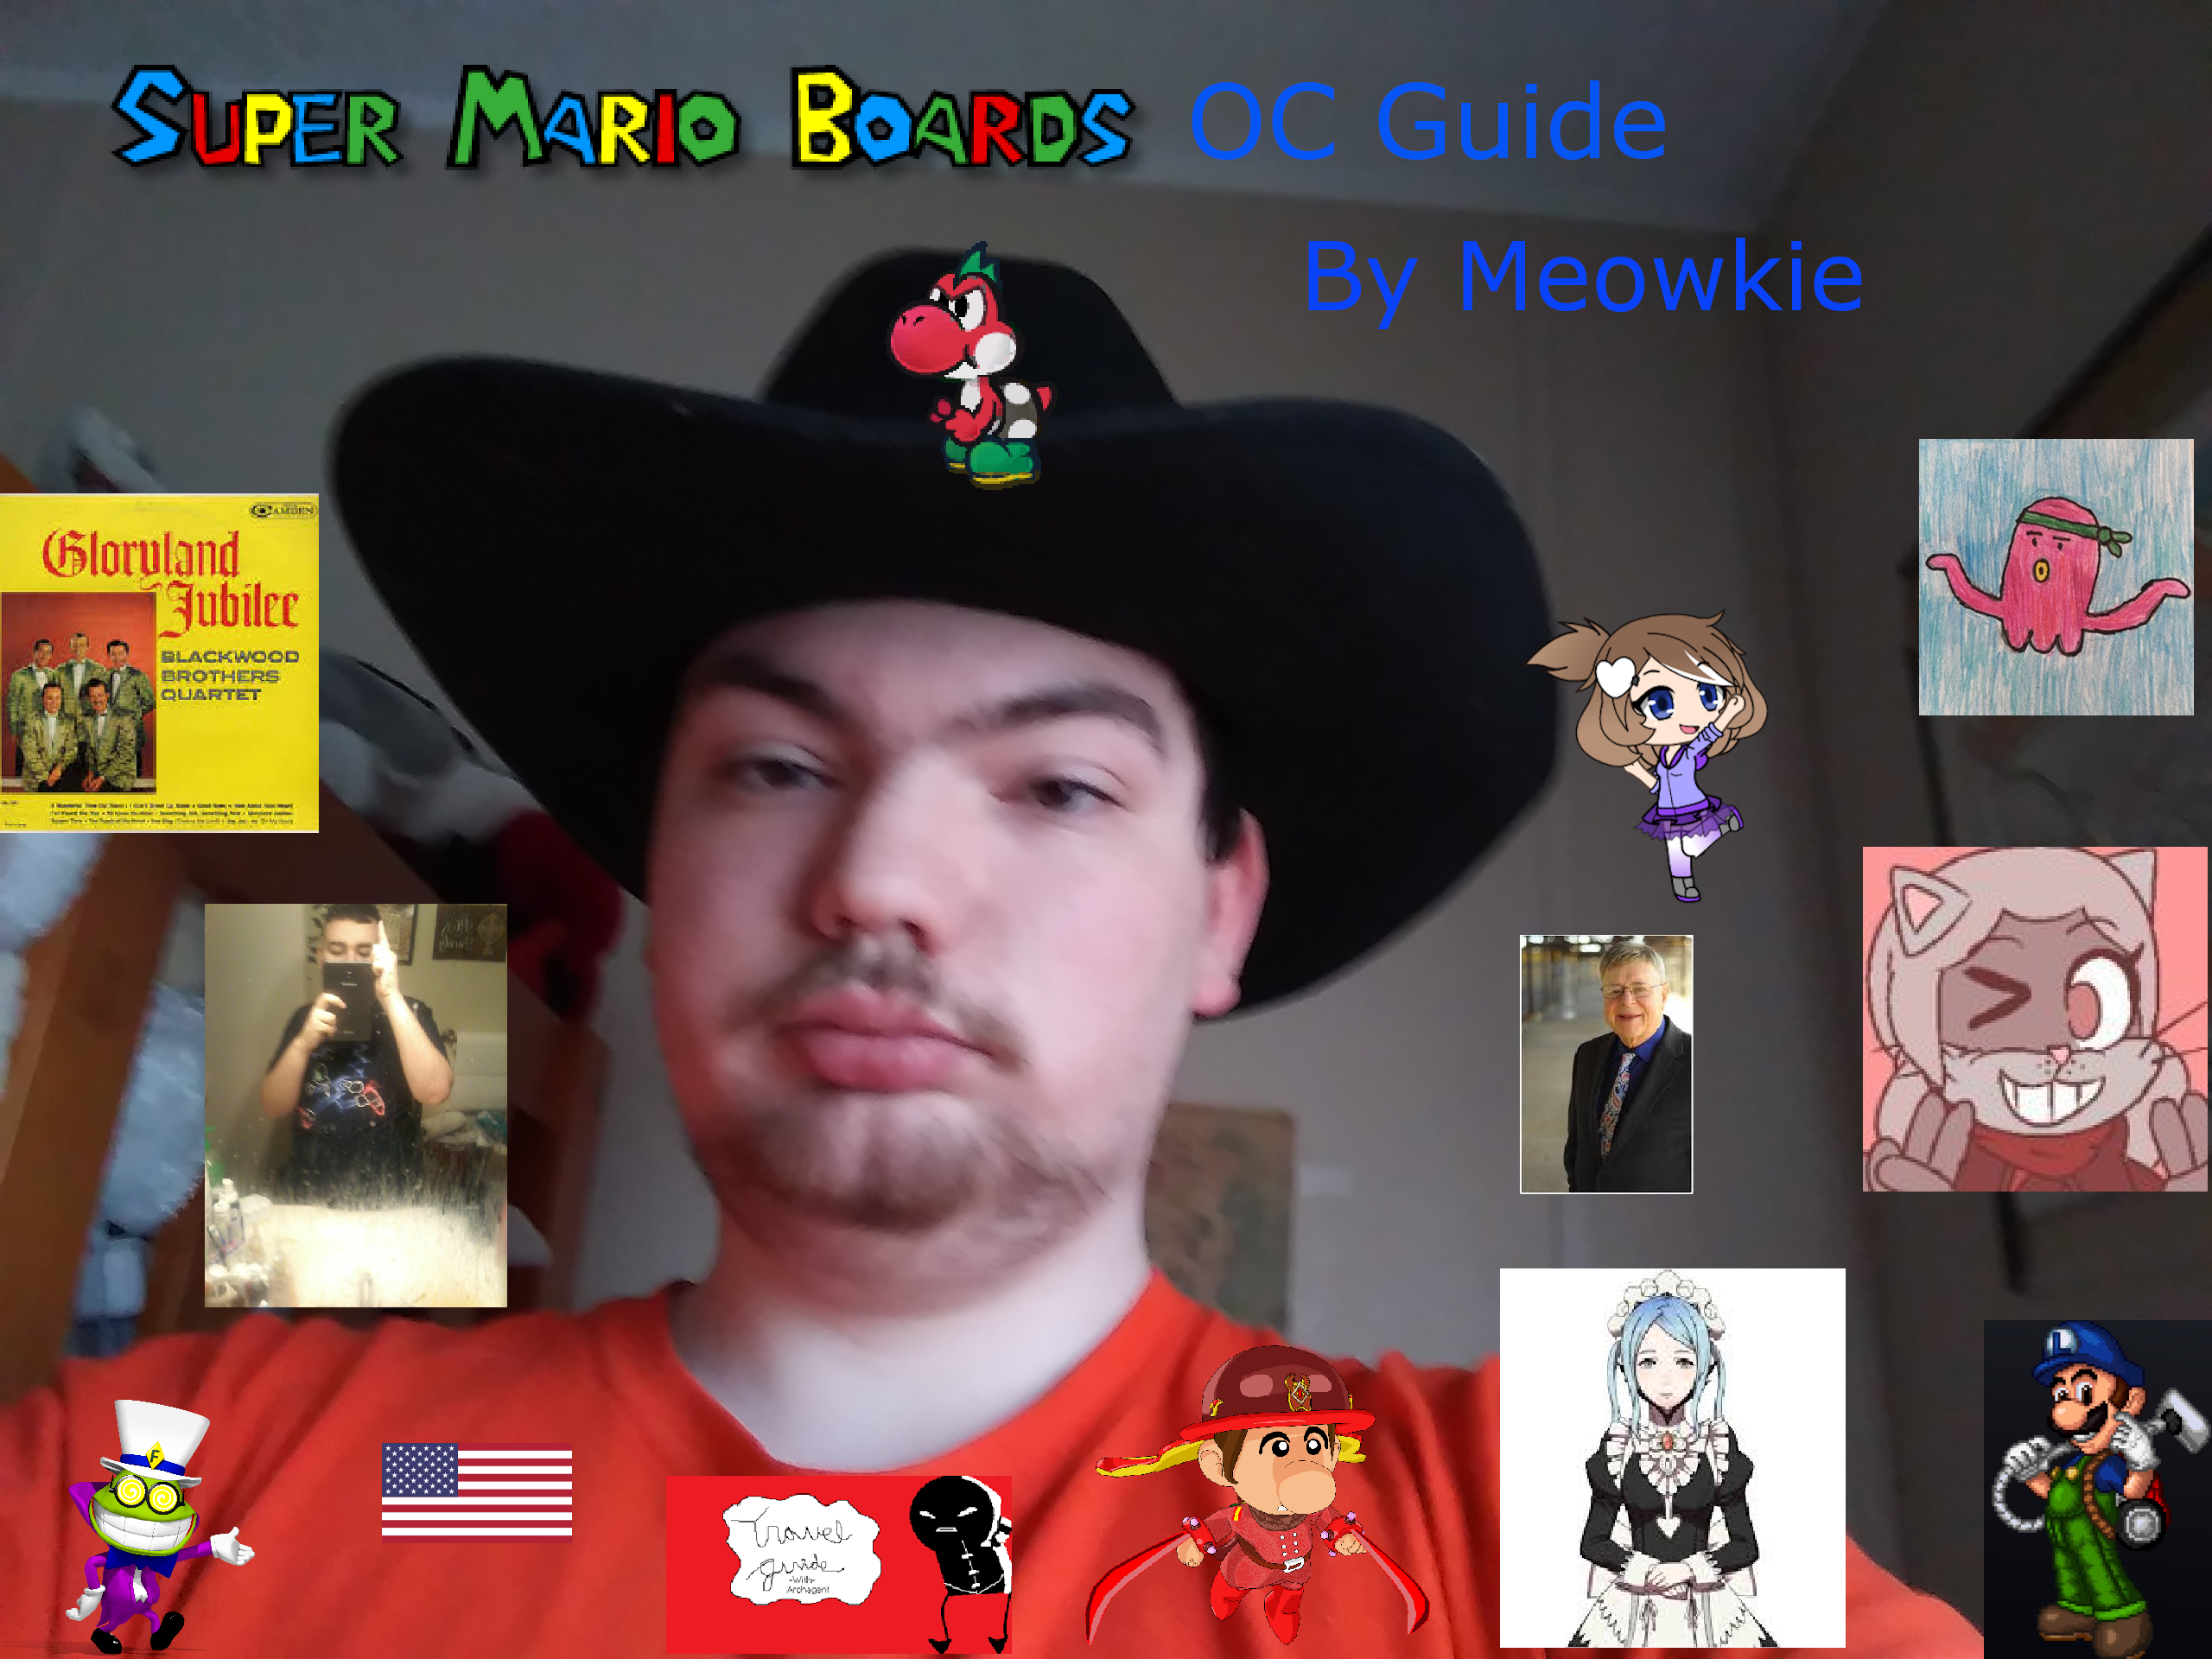 Mario Boards OC Guide Cover v 3.0.0.png